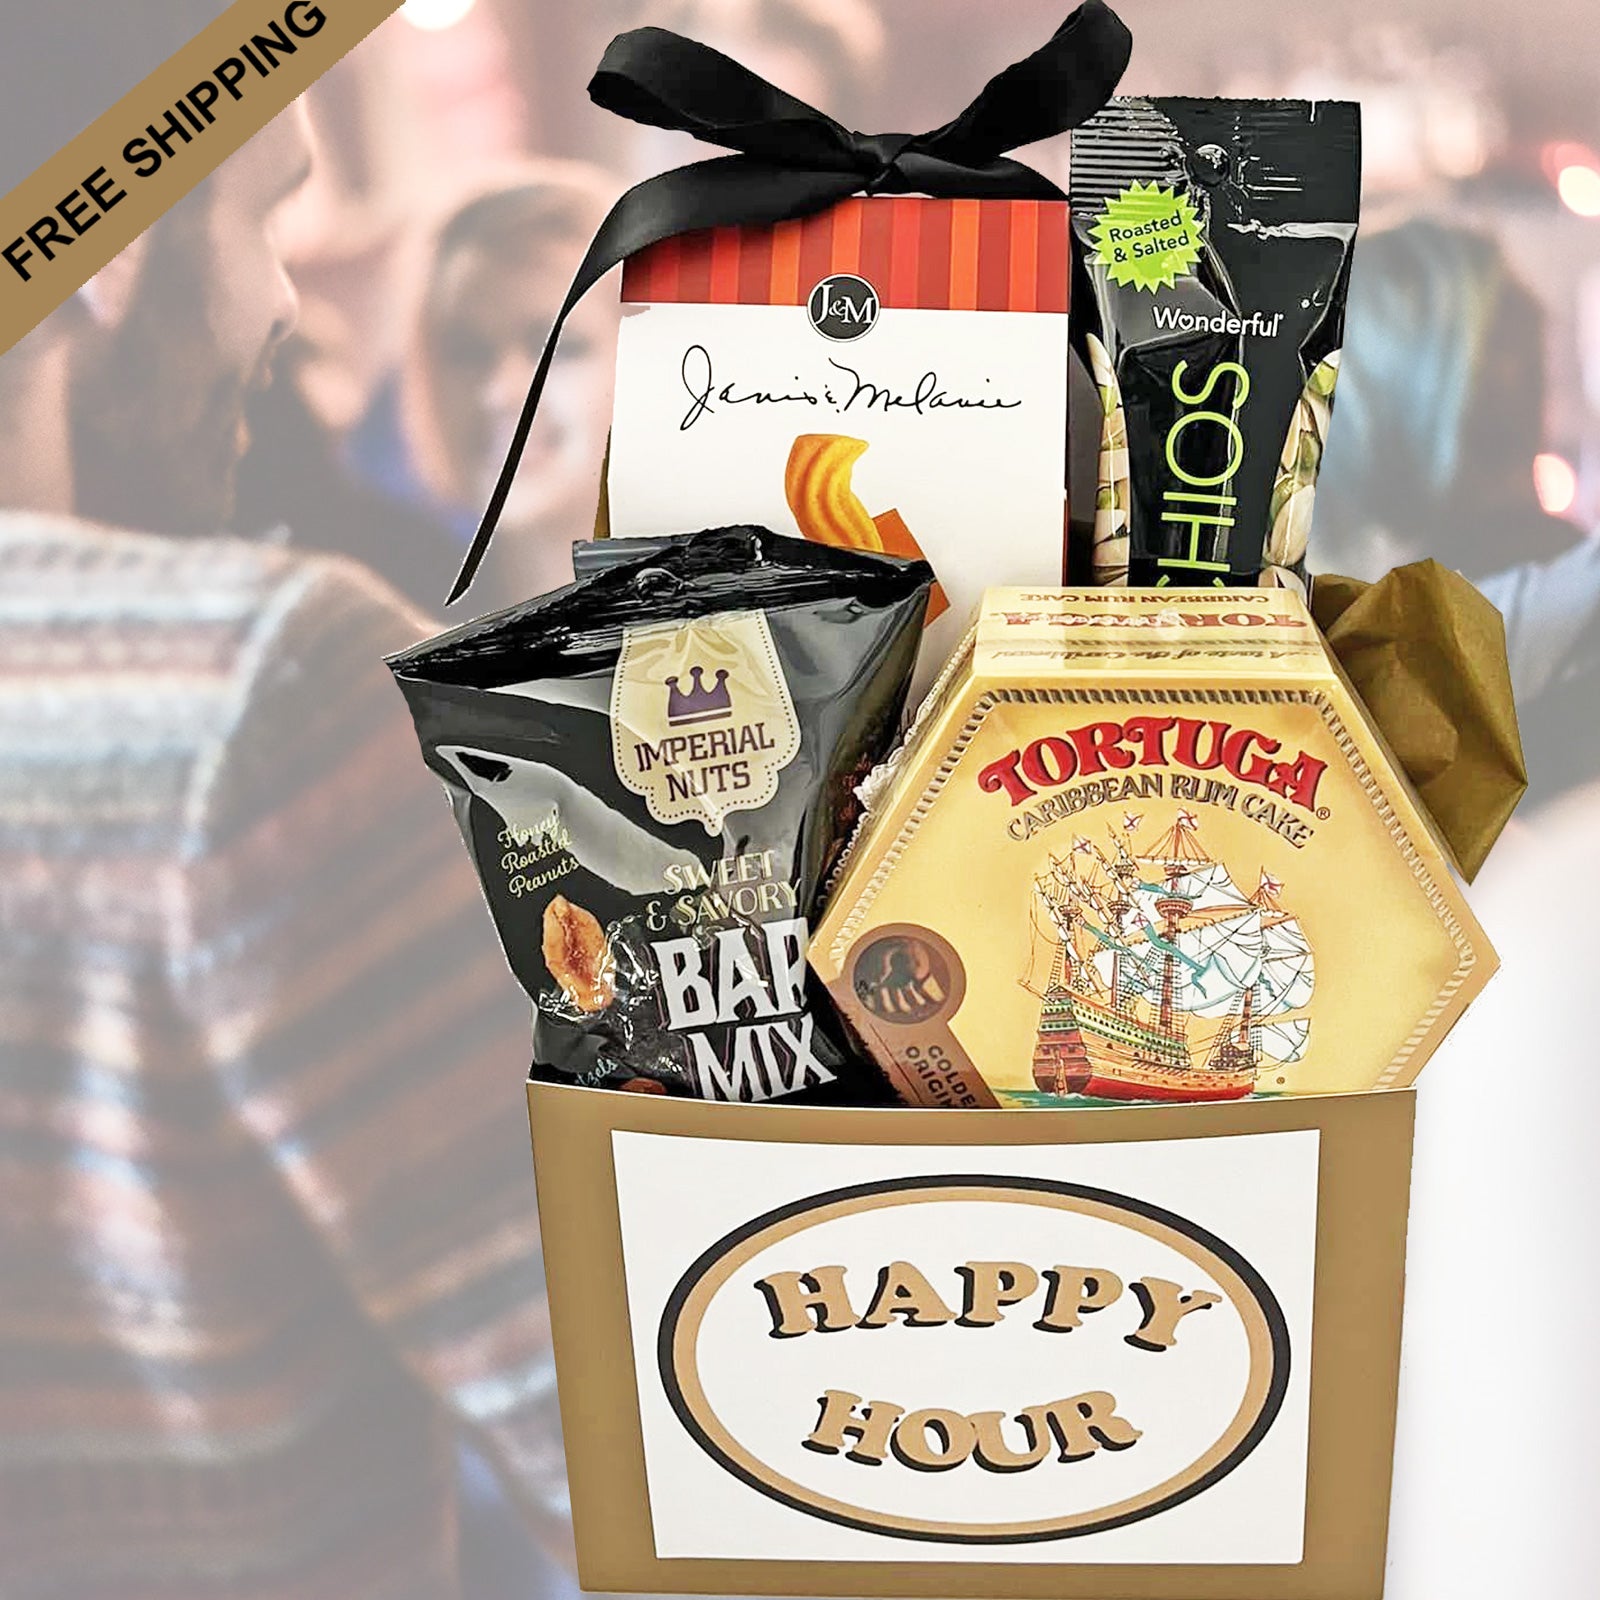 Happy Hour Snacks Gift Box with Rum Cake, Pretzels, Bar Mix and Nuts It's Time to Celebrate